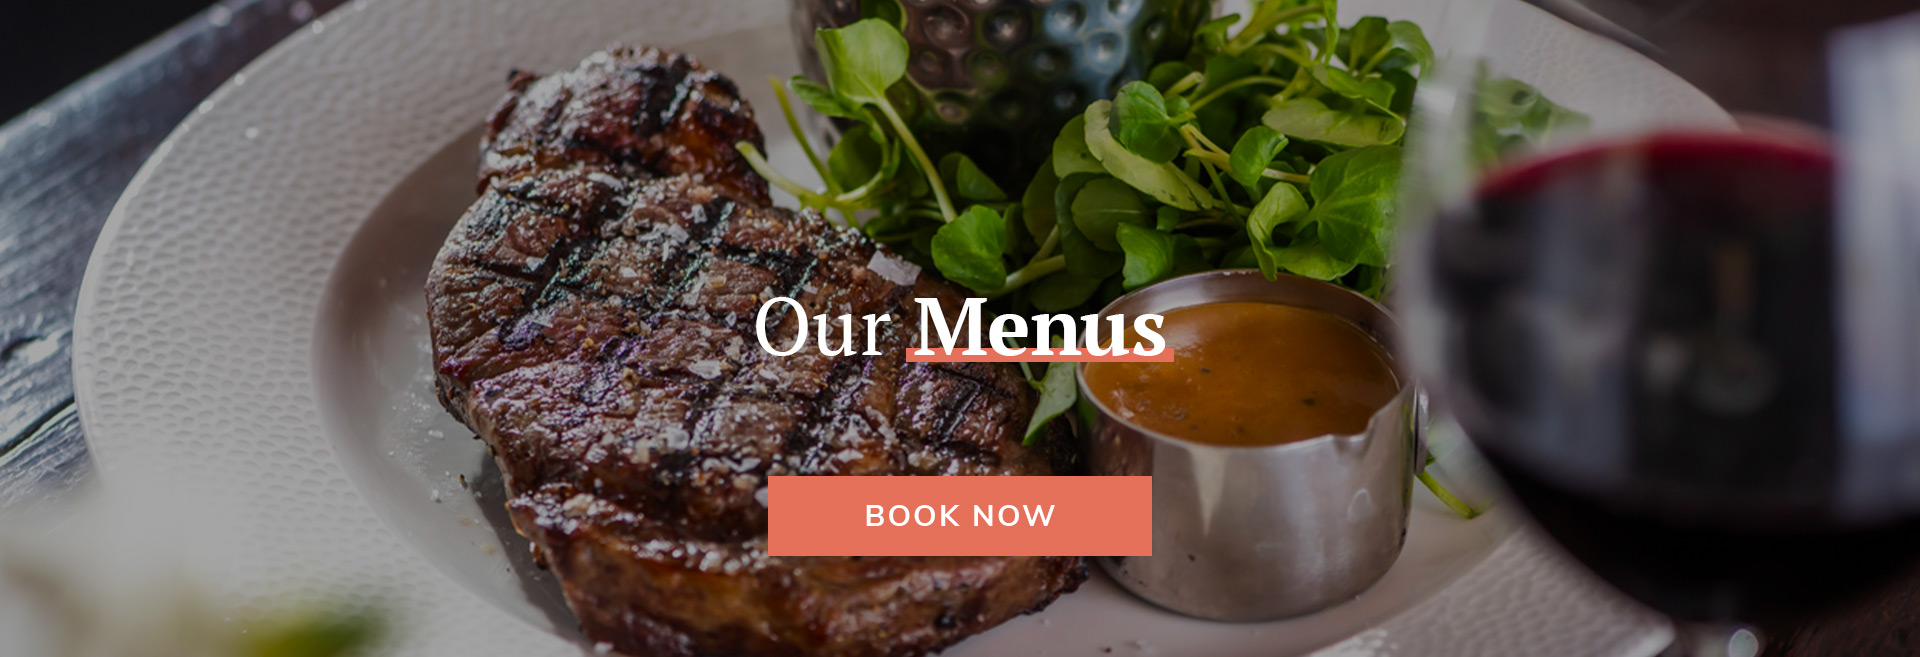 Book Now at The Marquis Cornwallis